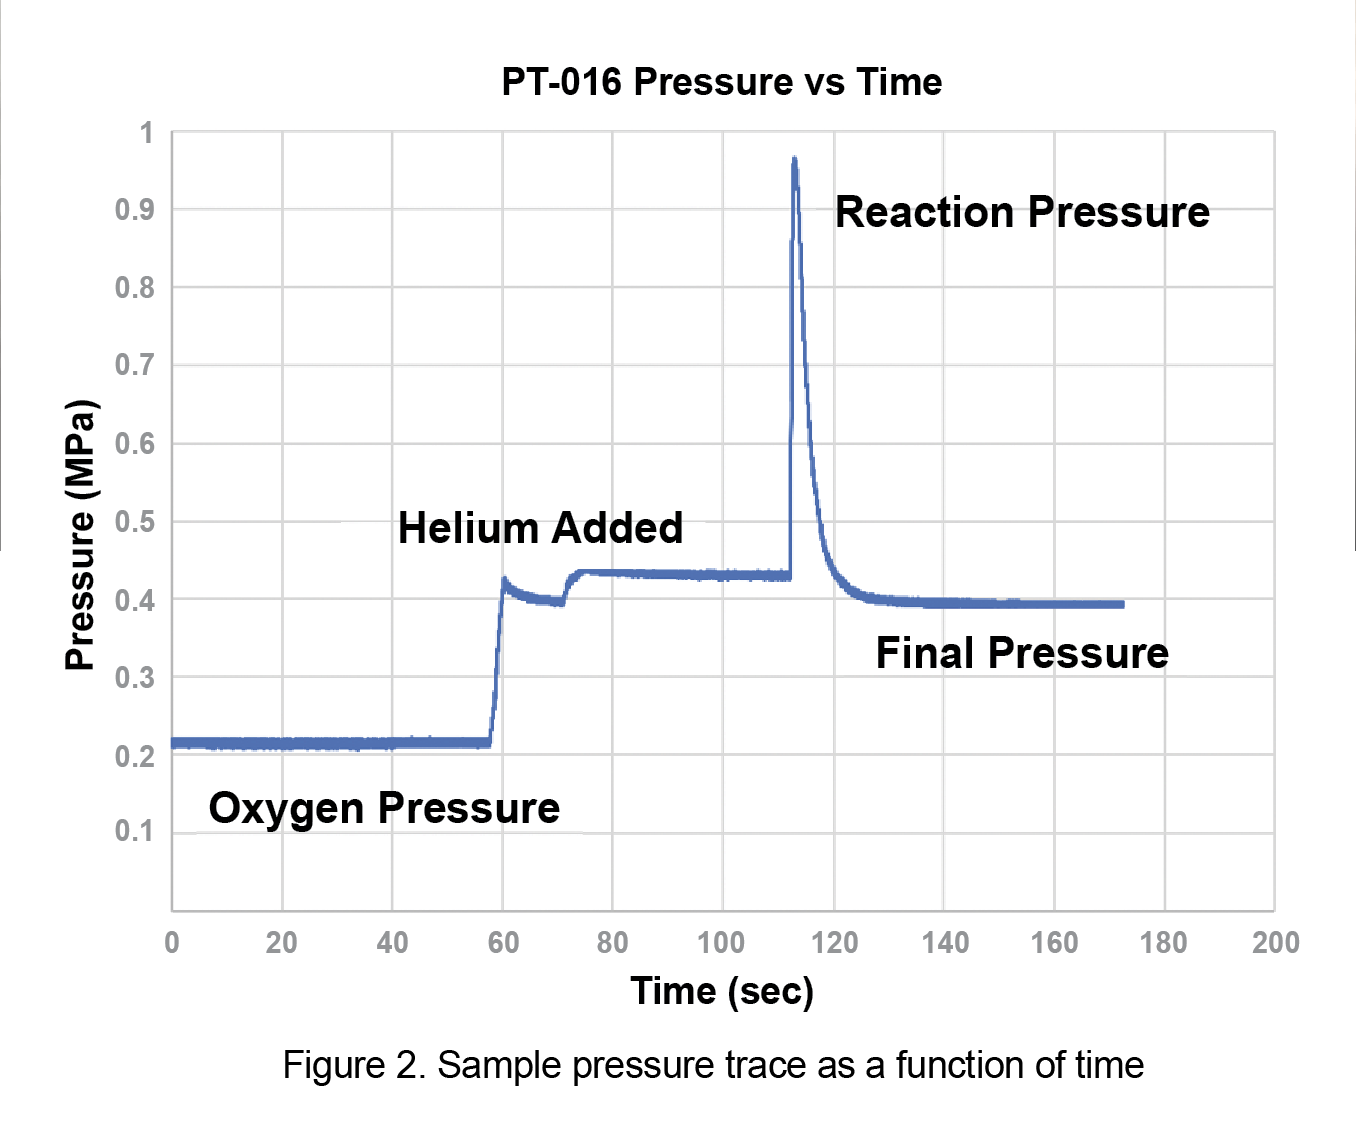 Figure 2. Sample pressure trace as a function of time